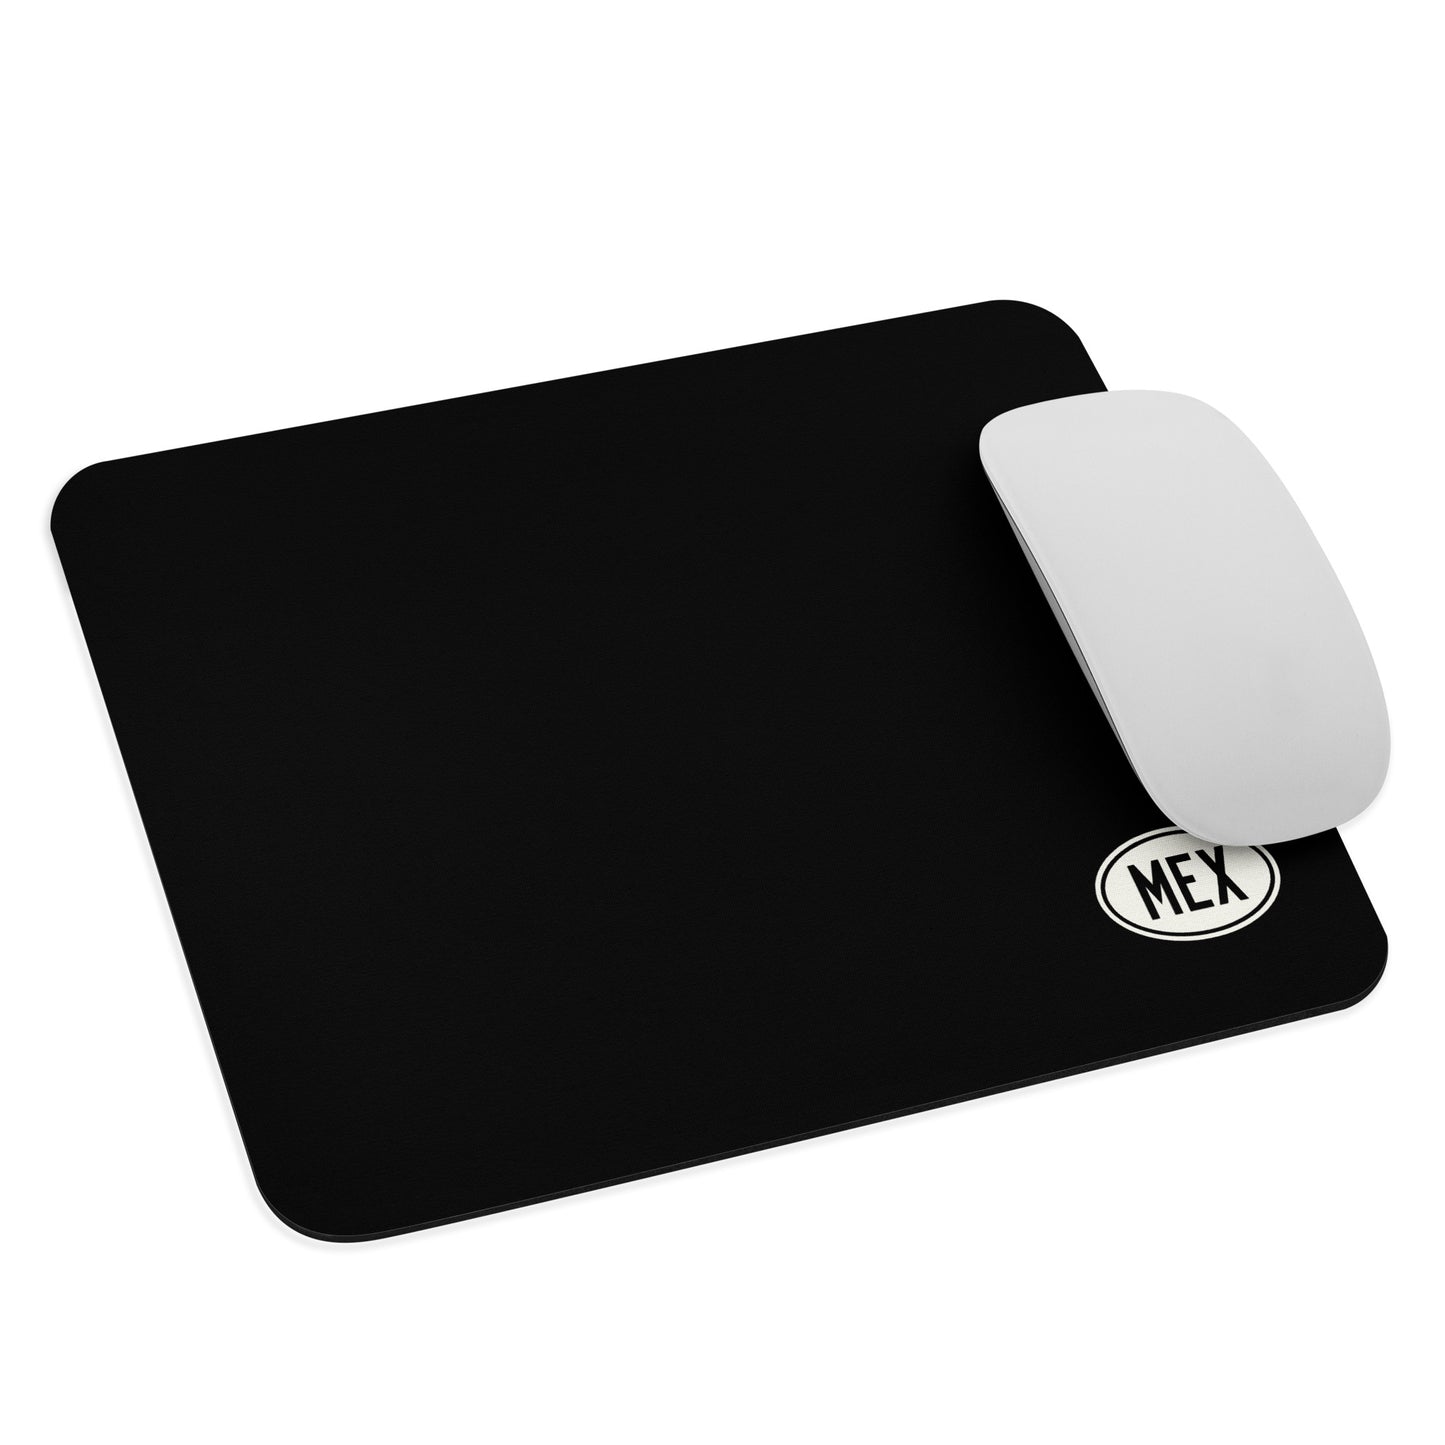 Unique Travel Gift Mouse Pad - White Oval • MEX Mexico City • YHM Designs - Image 03